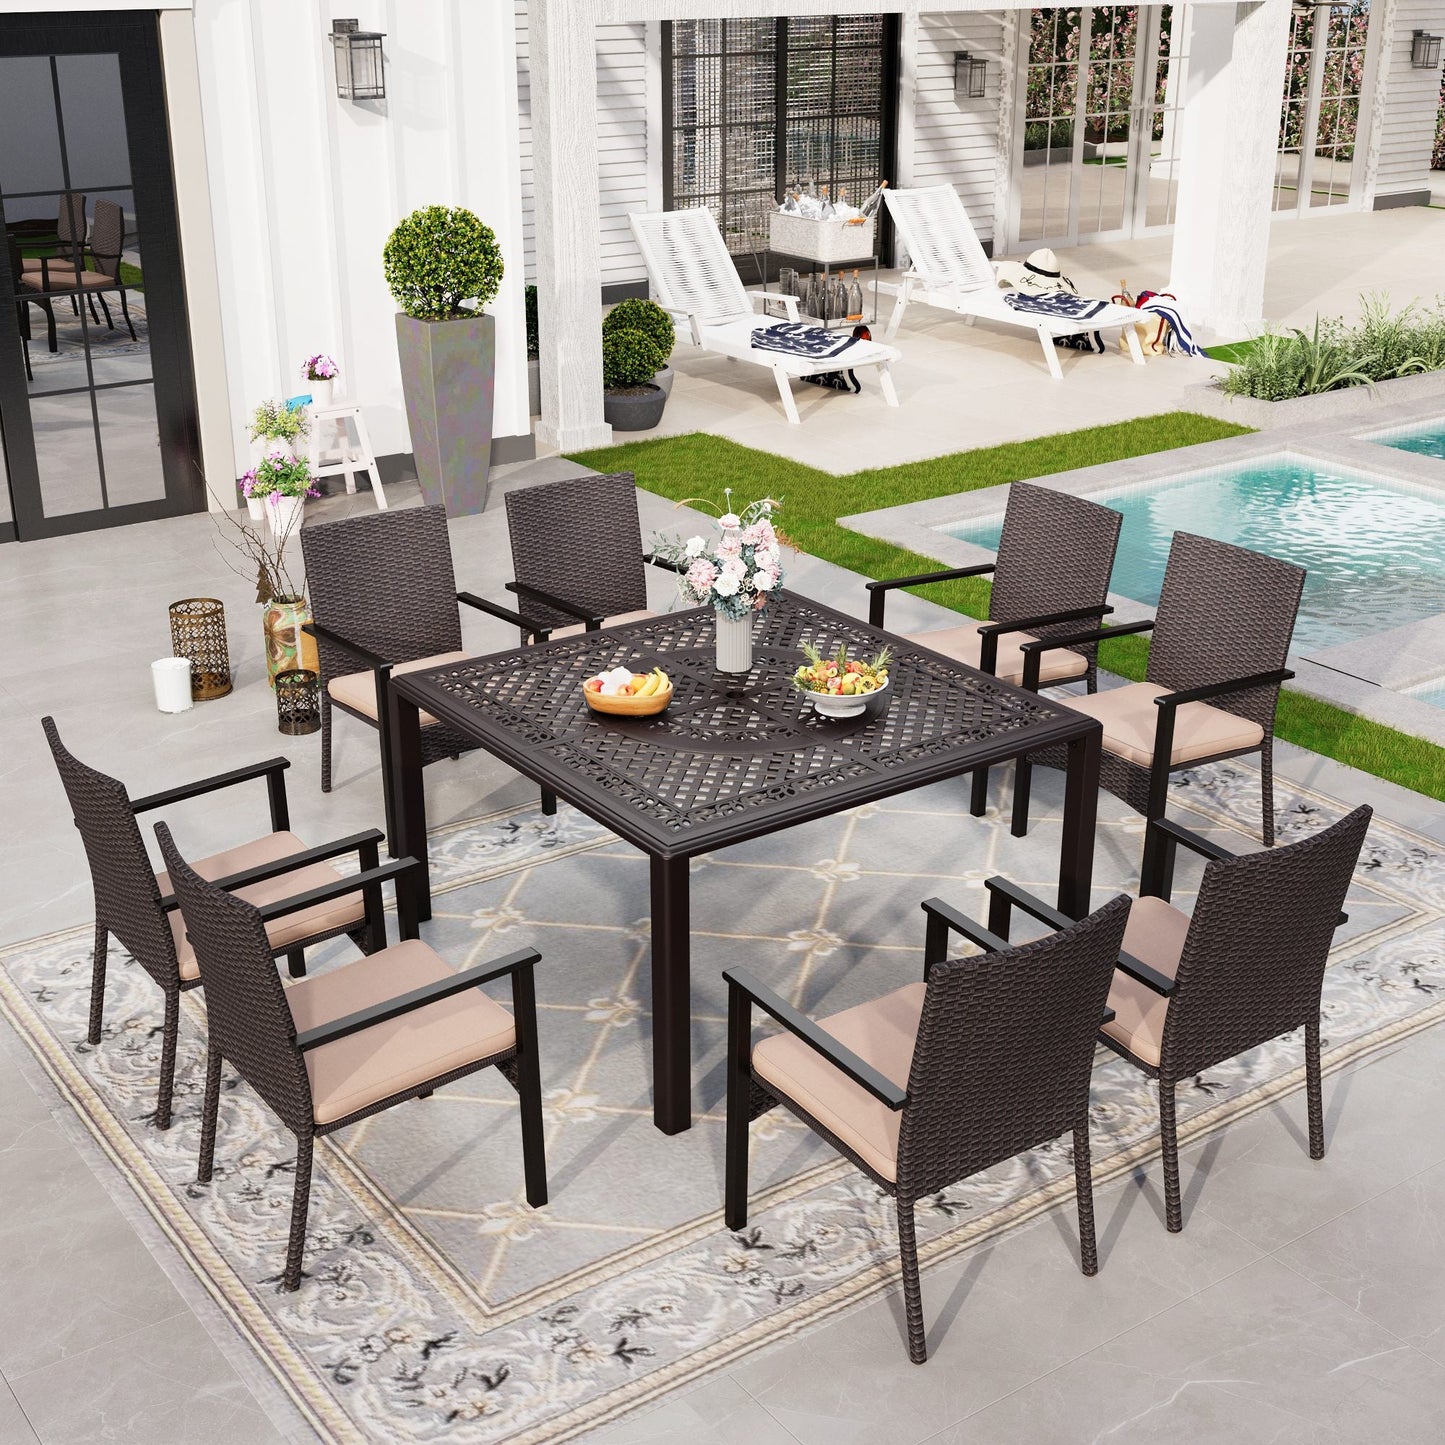 Sophia & William 9 Pieces Outdoor Patio Dining Set with Square Cast Aluminum Metal Dining Table & Cushioned Wicker Rattan Chairs for 8